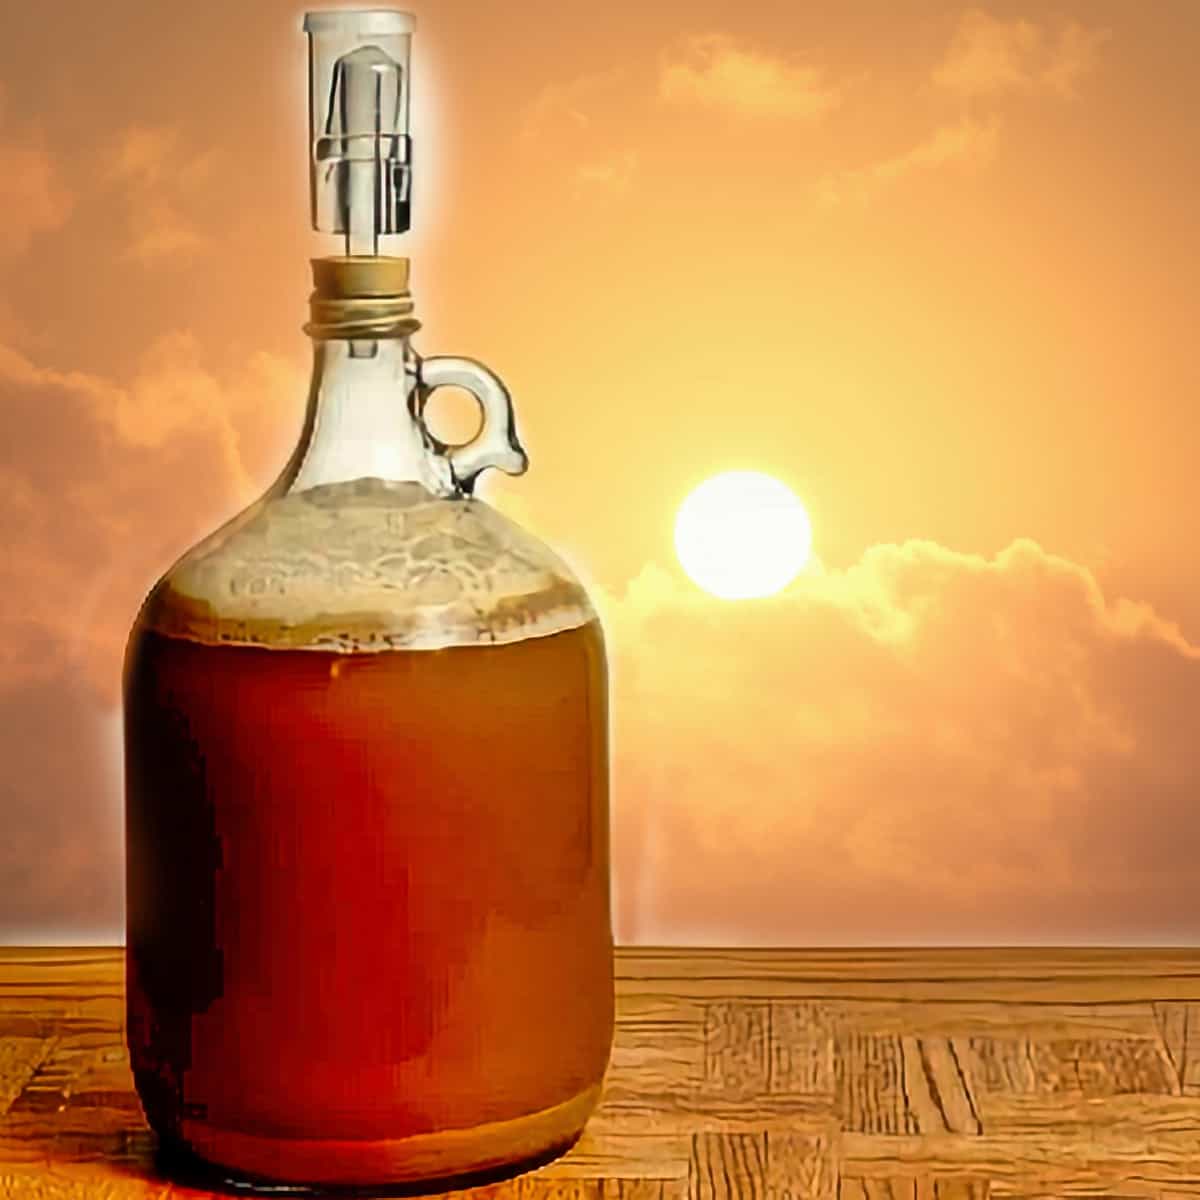 3. How to Make 1 Gallon Mead - 1 gallon beer recipes